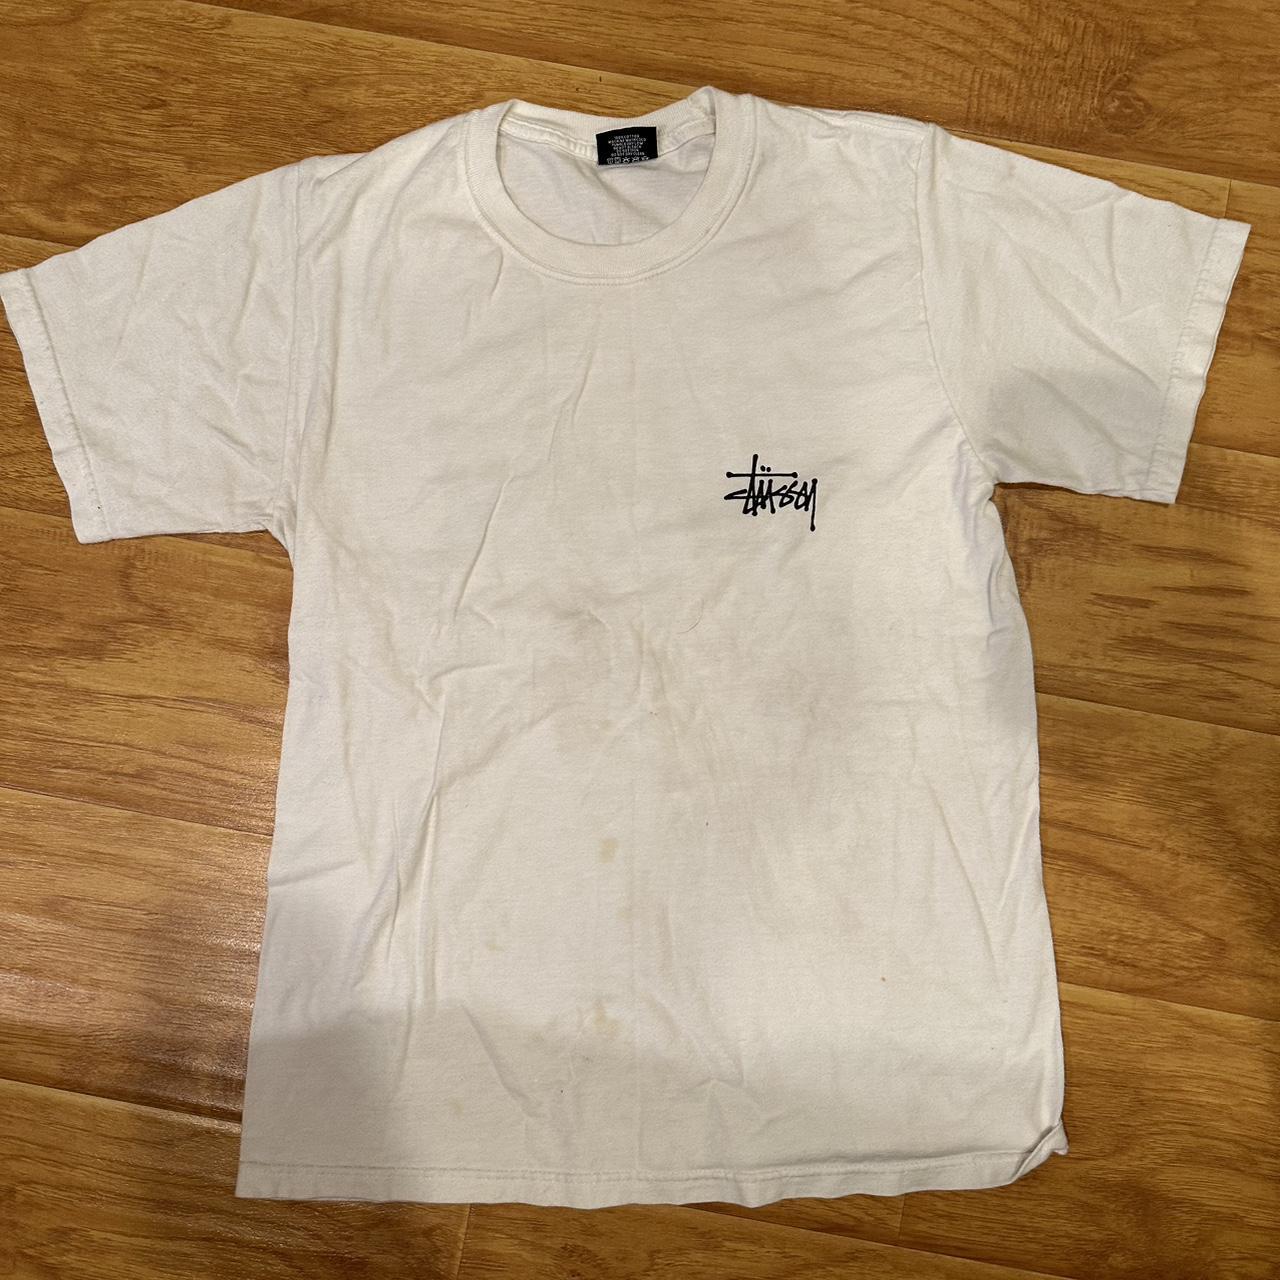 Basic white stussy logo t shirt Some stain in the... - Depop